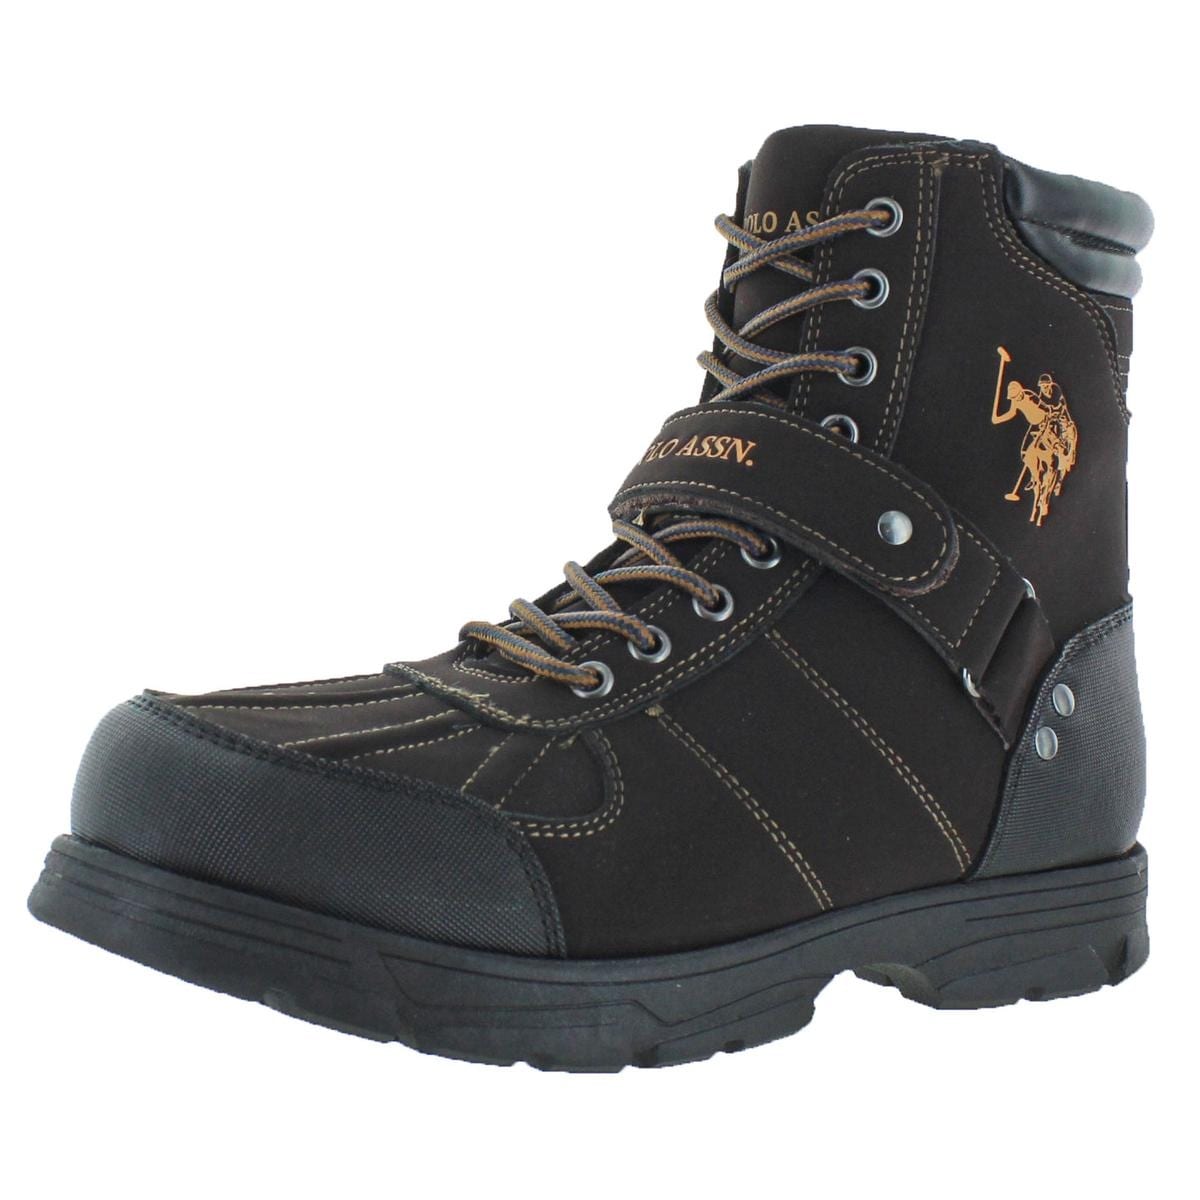 polo duck boots mens shoes